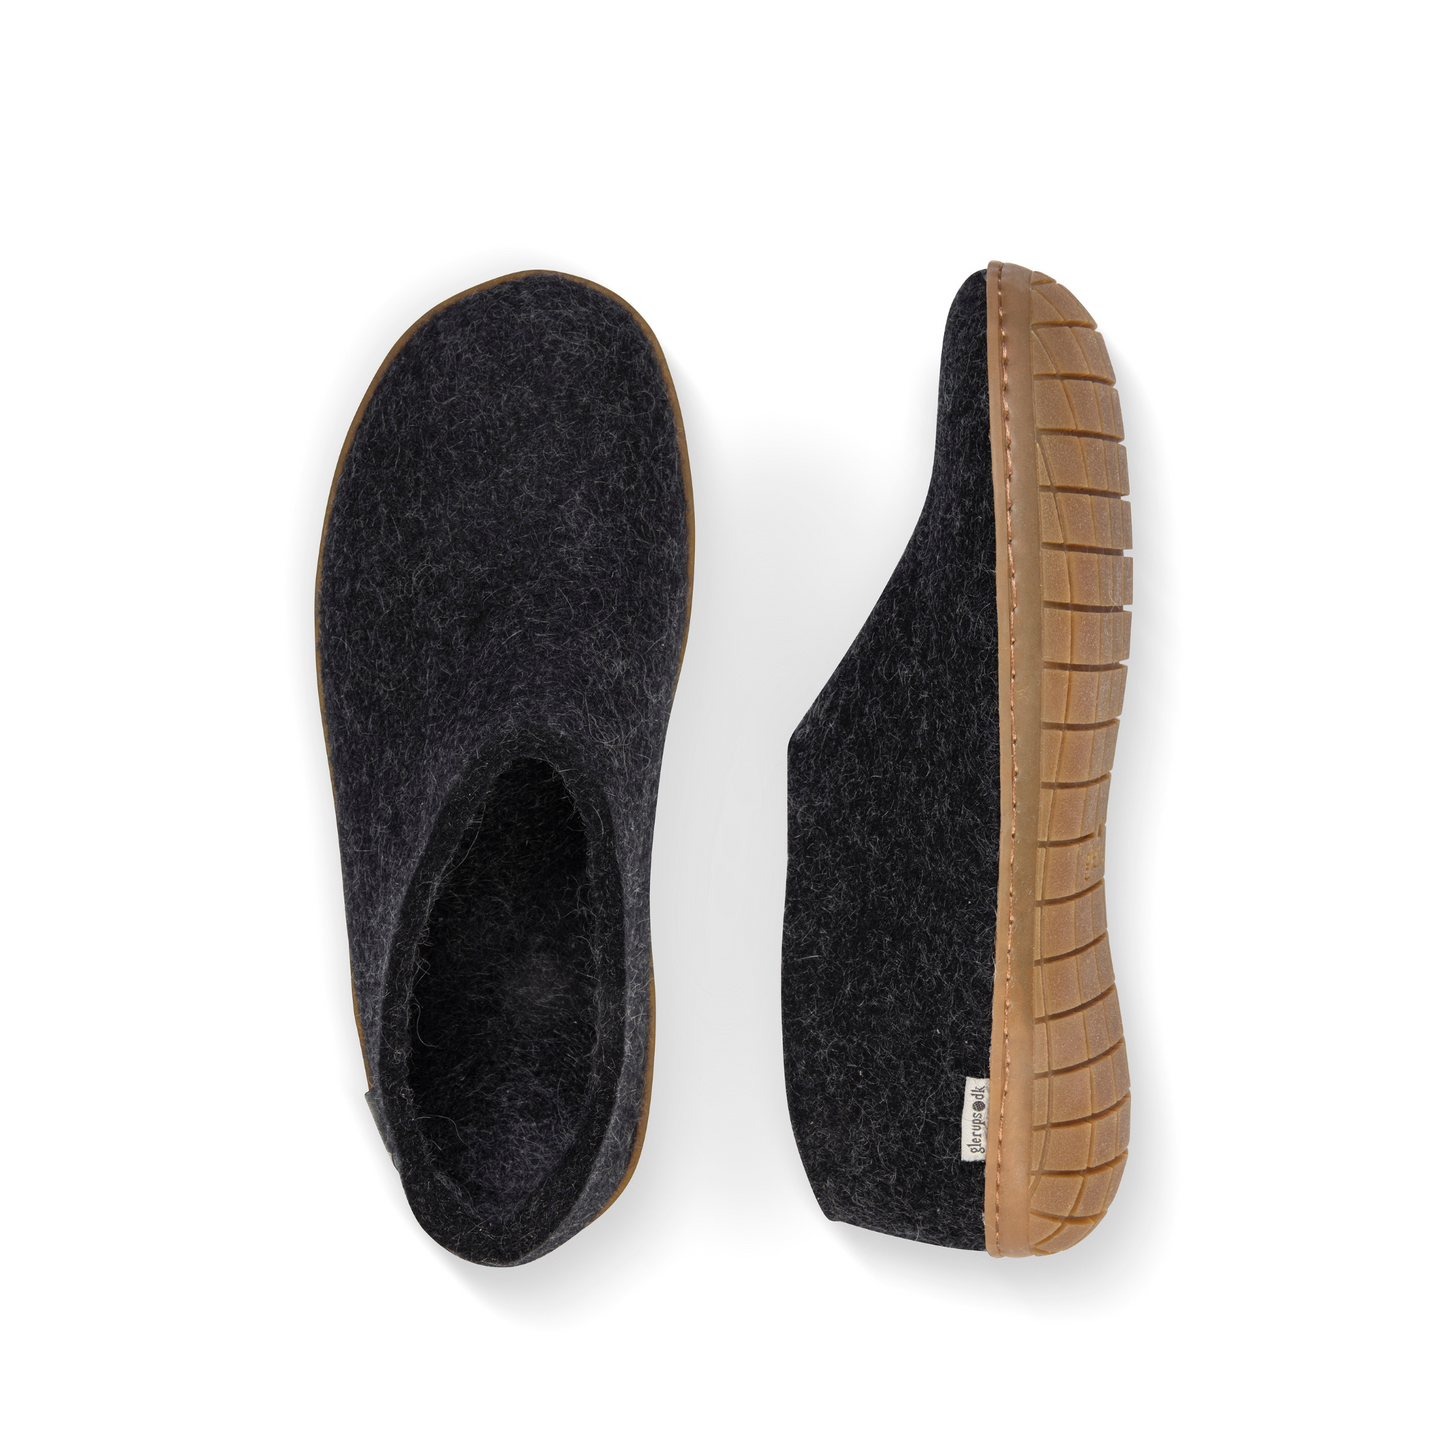 An overhead view of two dark grey felted wool tall-back slippers. One is pictured straight on, showing the top face of the slipper, while the other lays on its side, showing the profile with caramel rubber sole with a row of stitching.